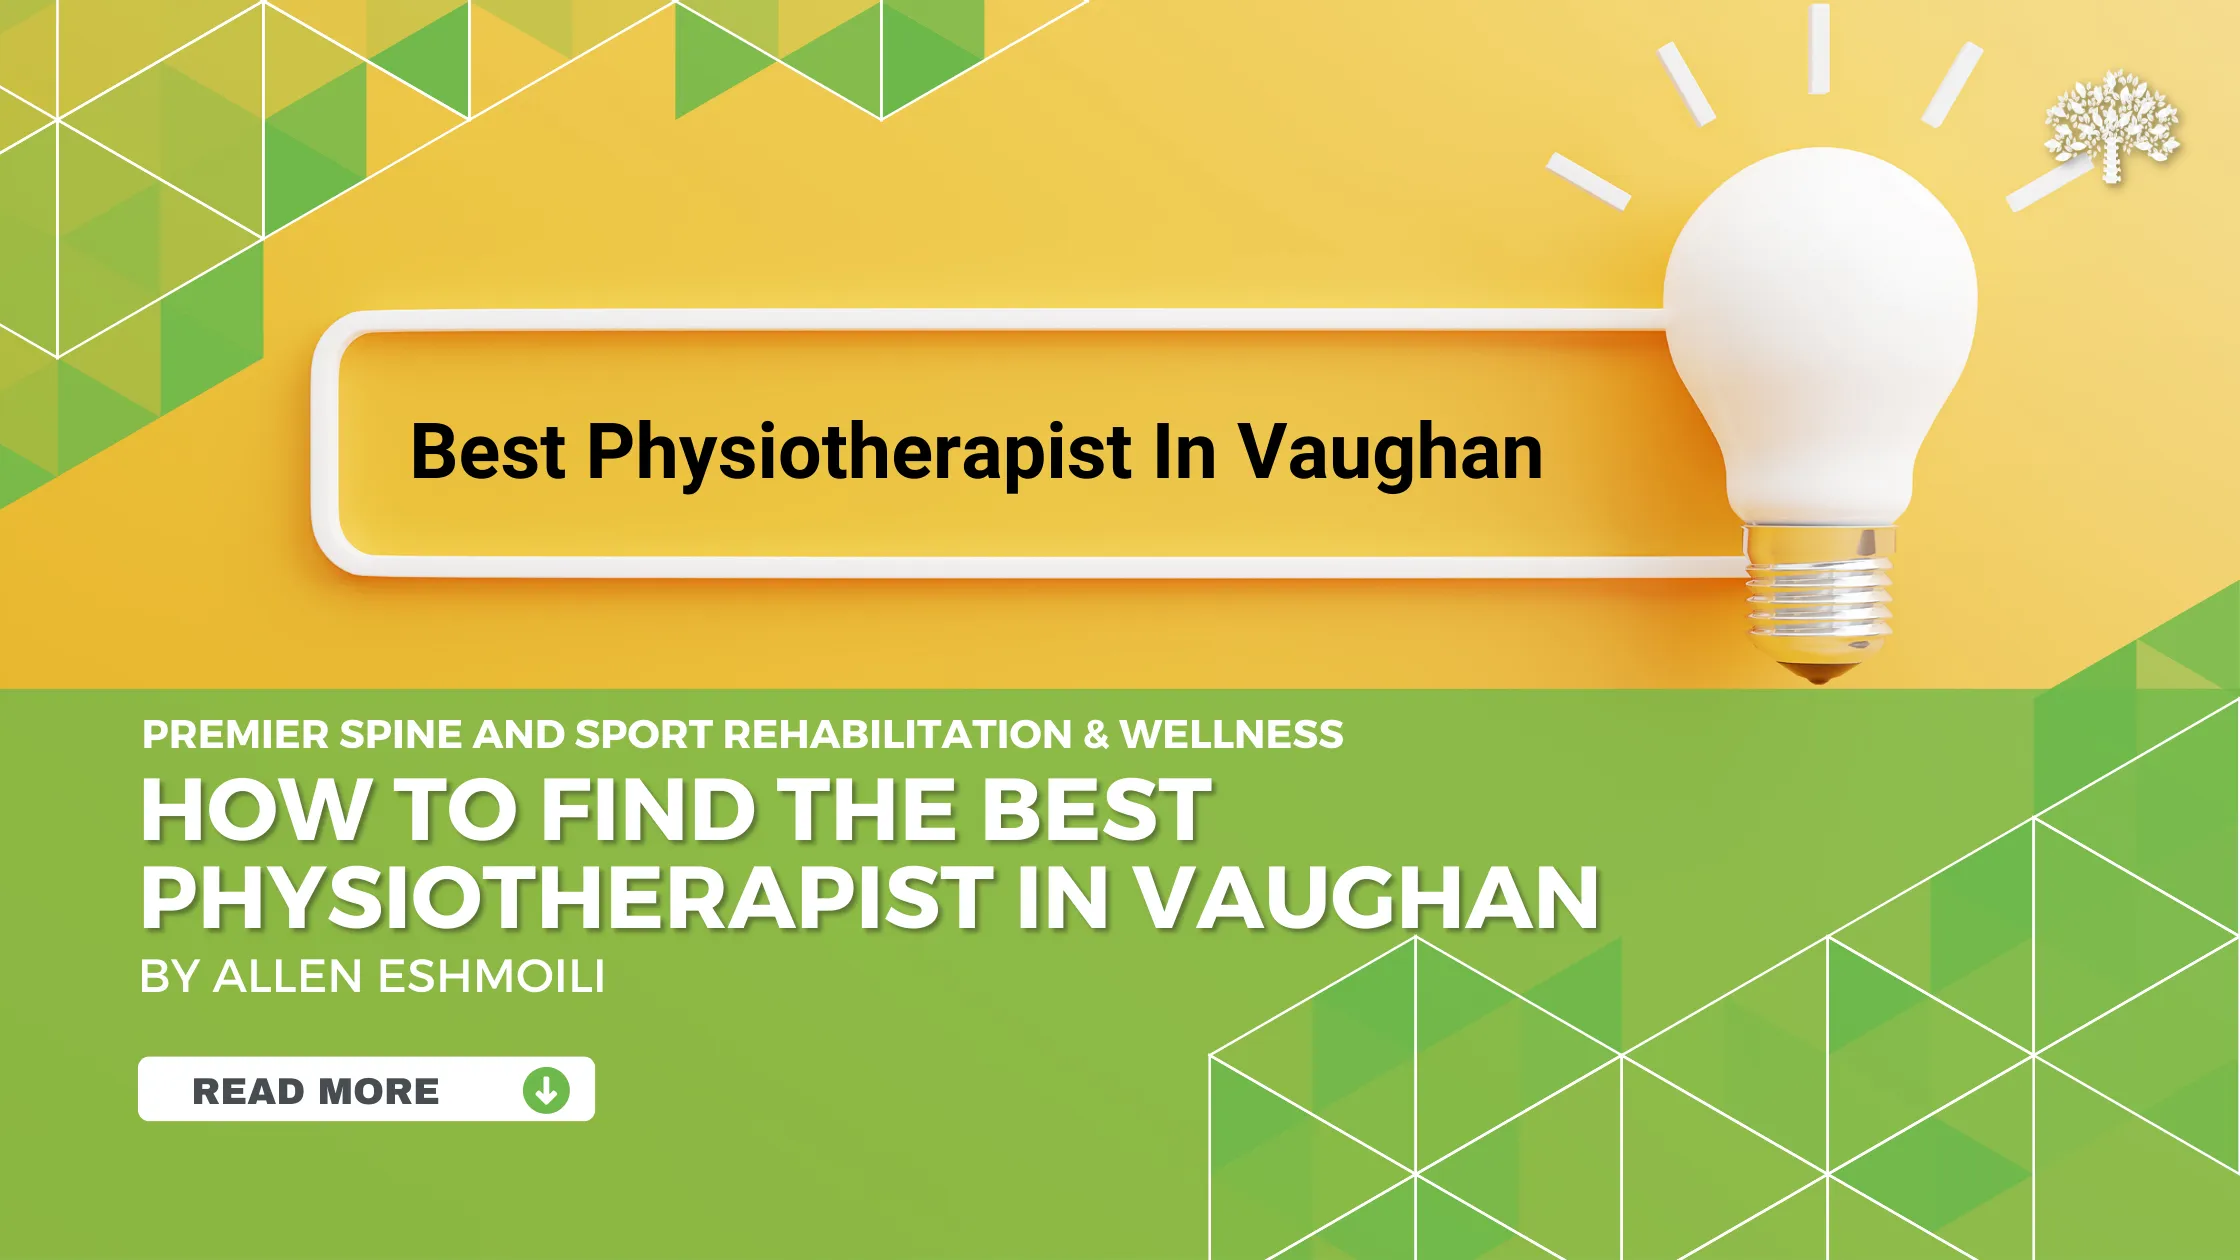 How To Find The Best Physiotherapist In Vaughan